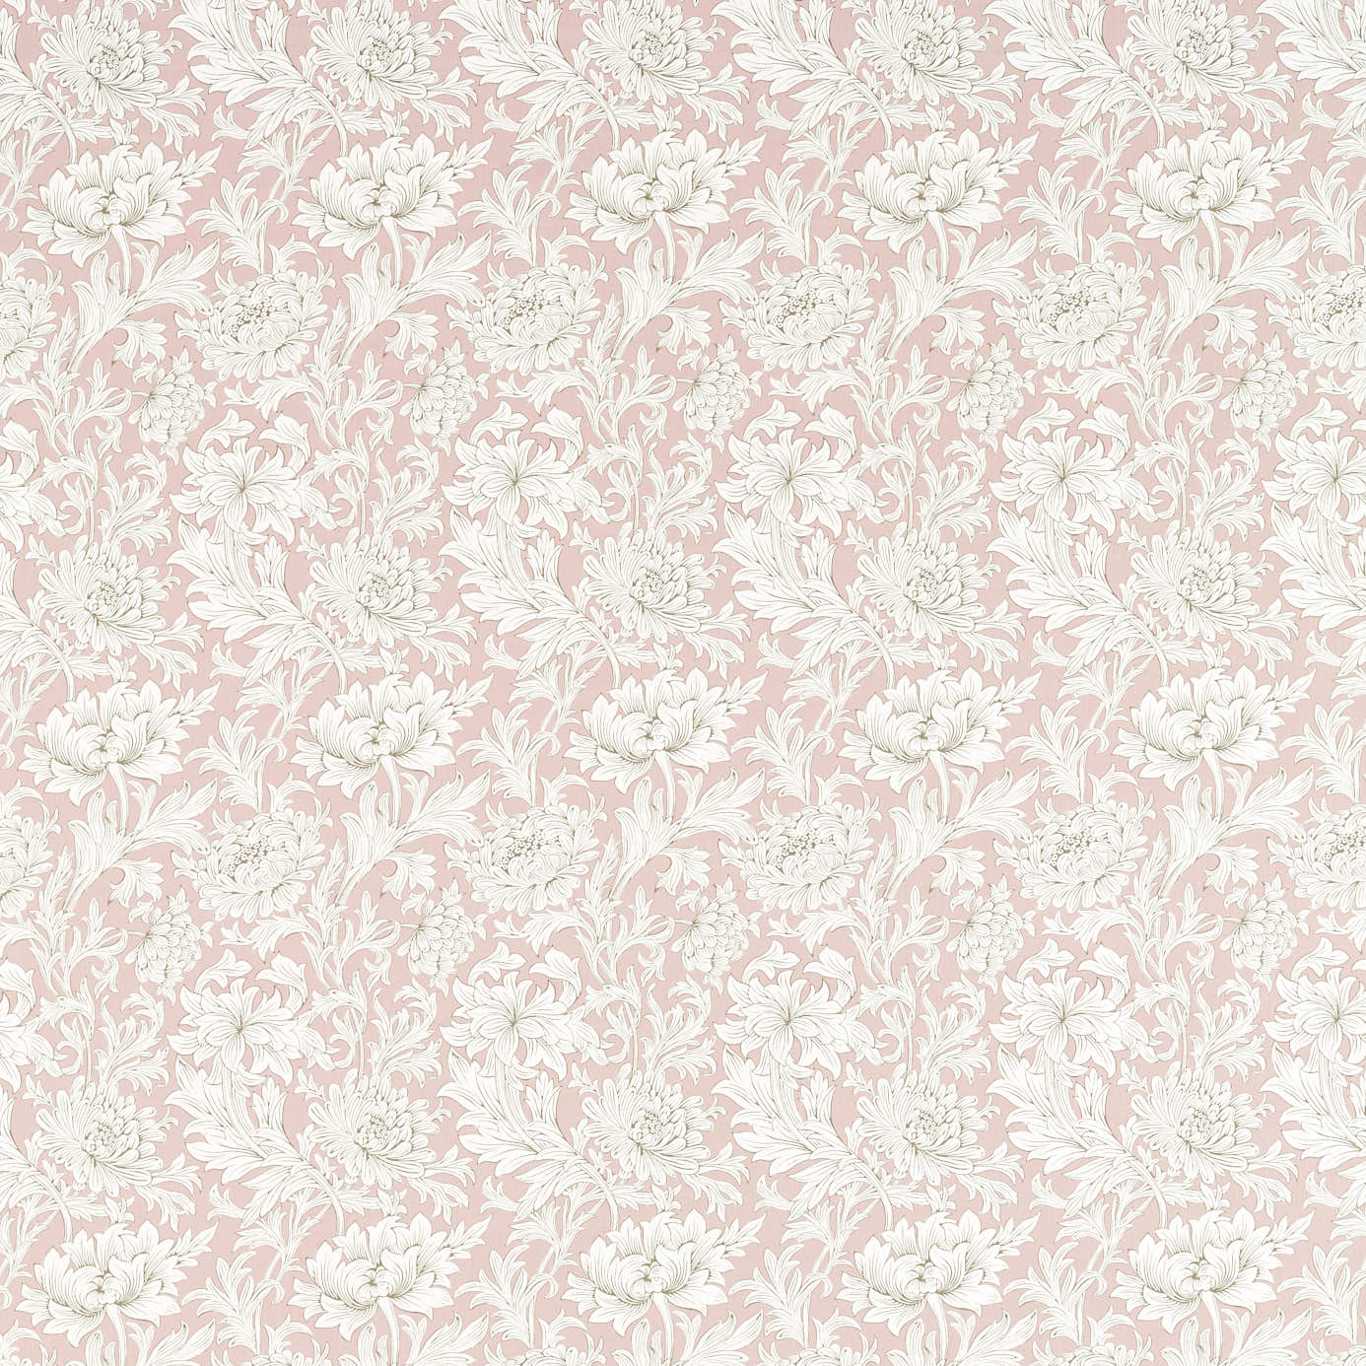 Chrysanthemum Toile Cochineal Pink Fabric by MOR